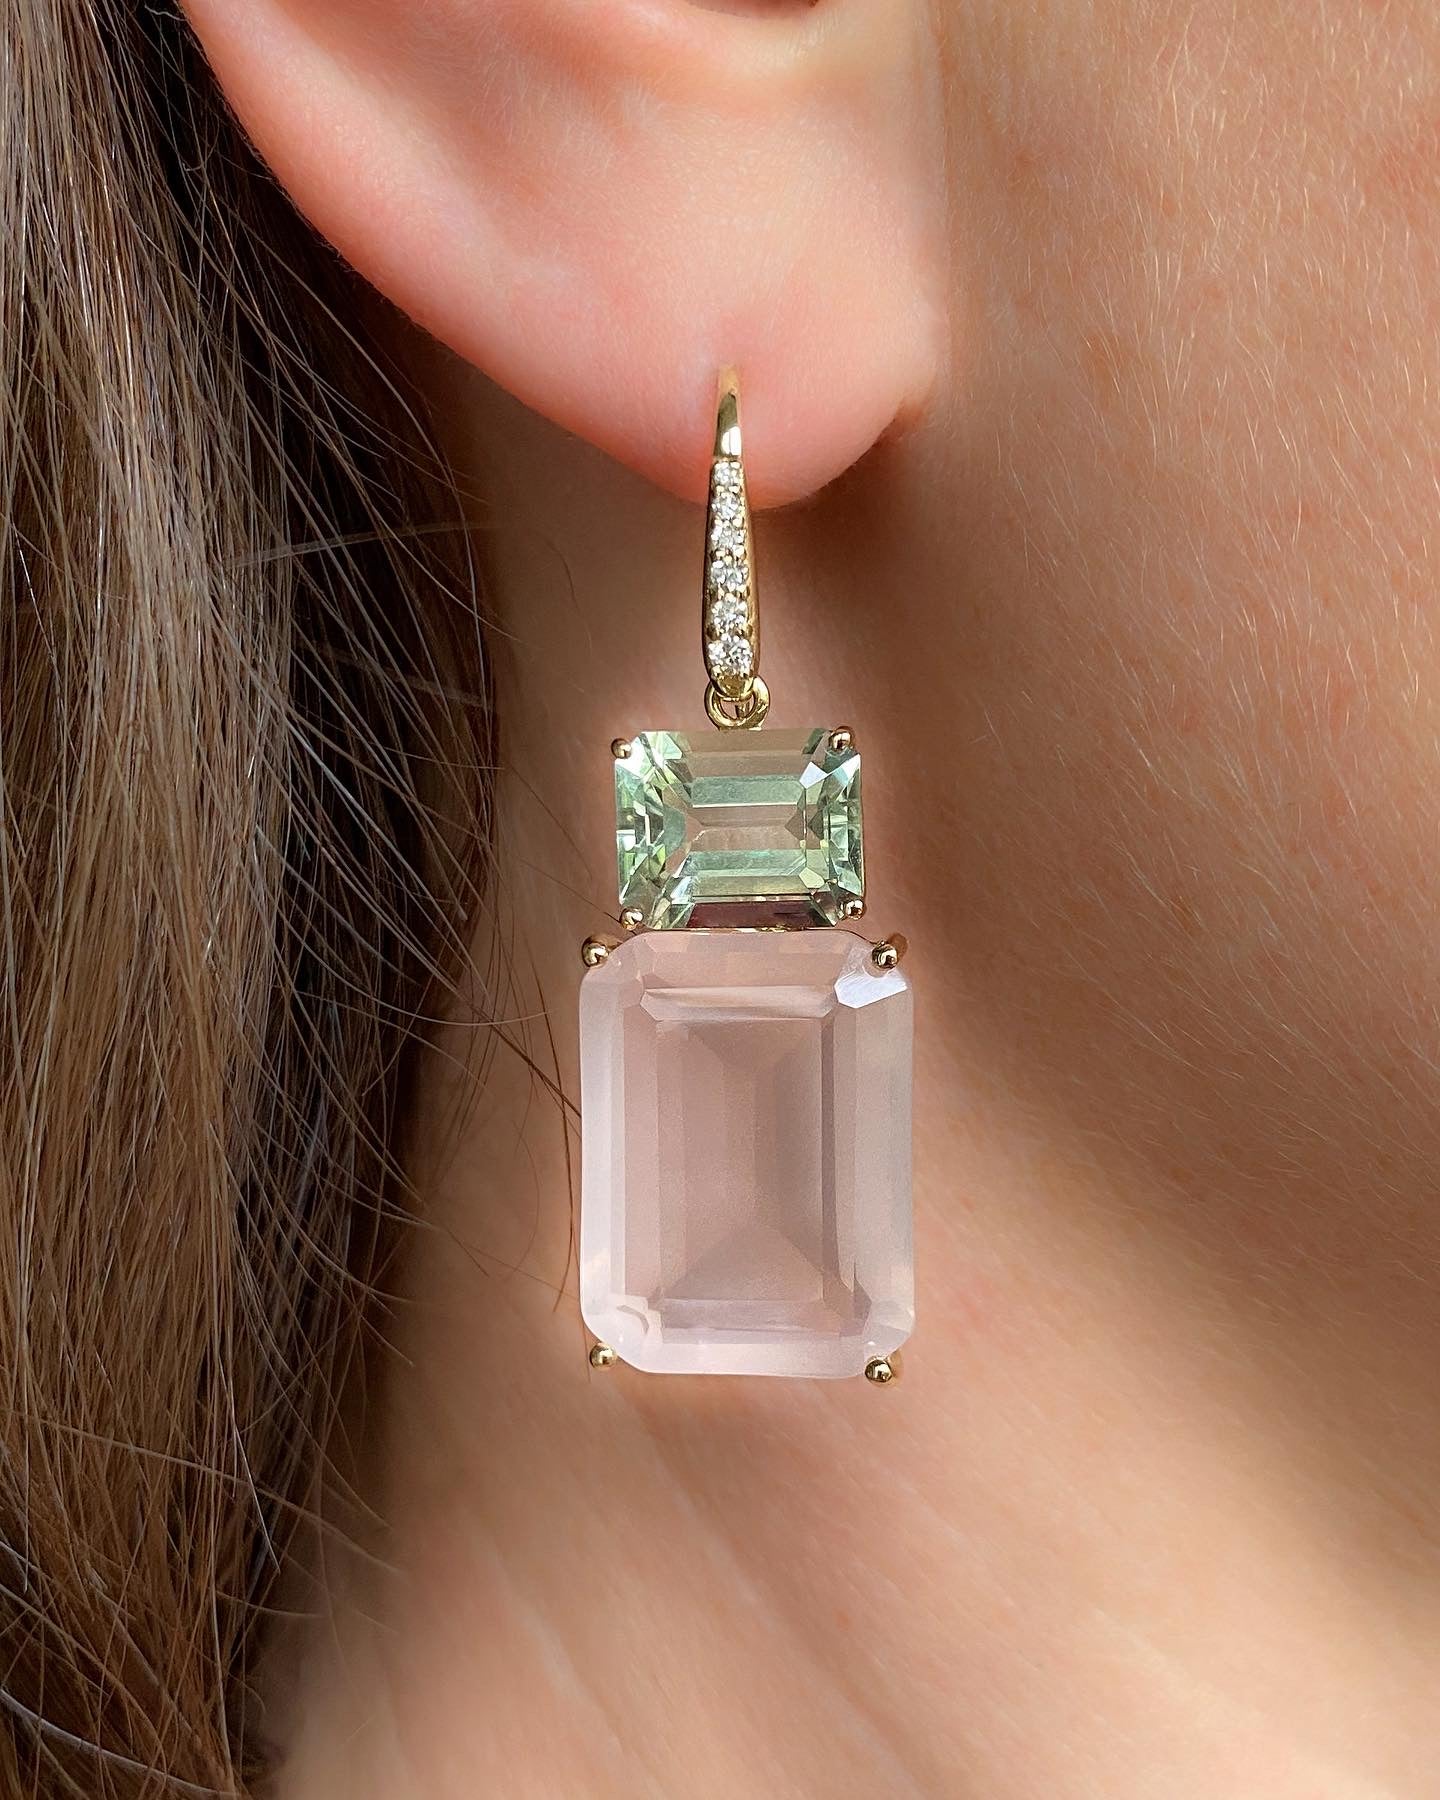 Earrings with rosequartz, praseolite and diamonds